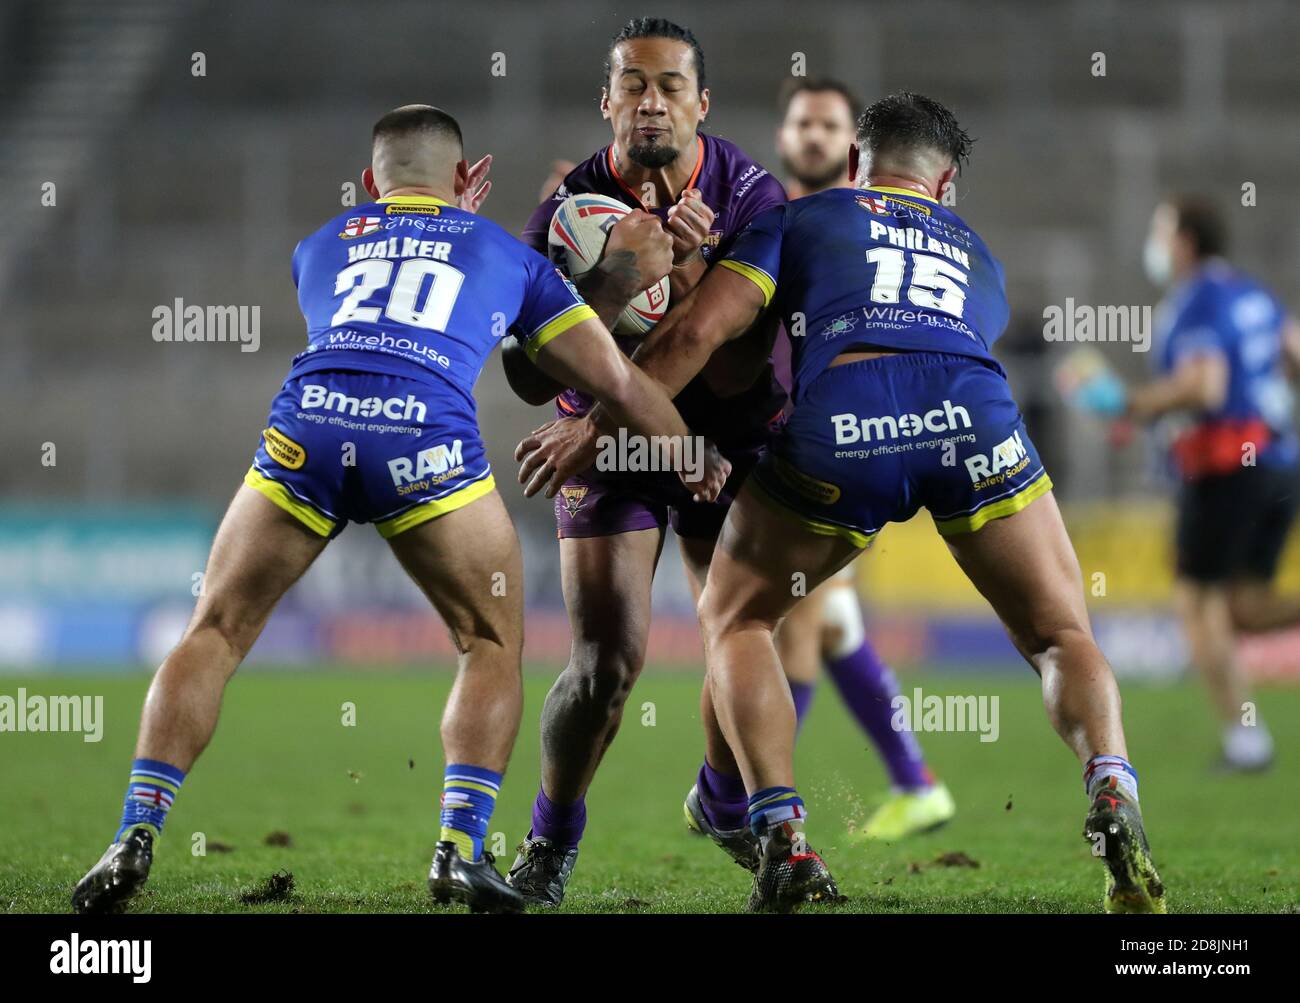 Huddersfield Giants' James Gavet (centre) is tackled by Warrington Wolves' Danny Walker (left) and Joe Philbin during the Betfred Super League match at the Totally Wicked Stadium, St Helens. Stock Photo